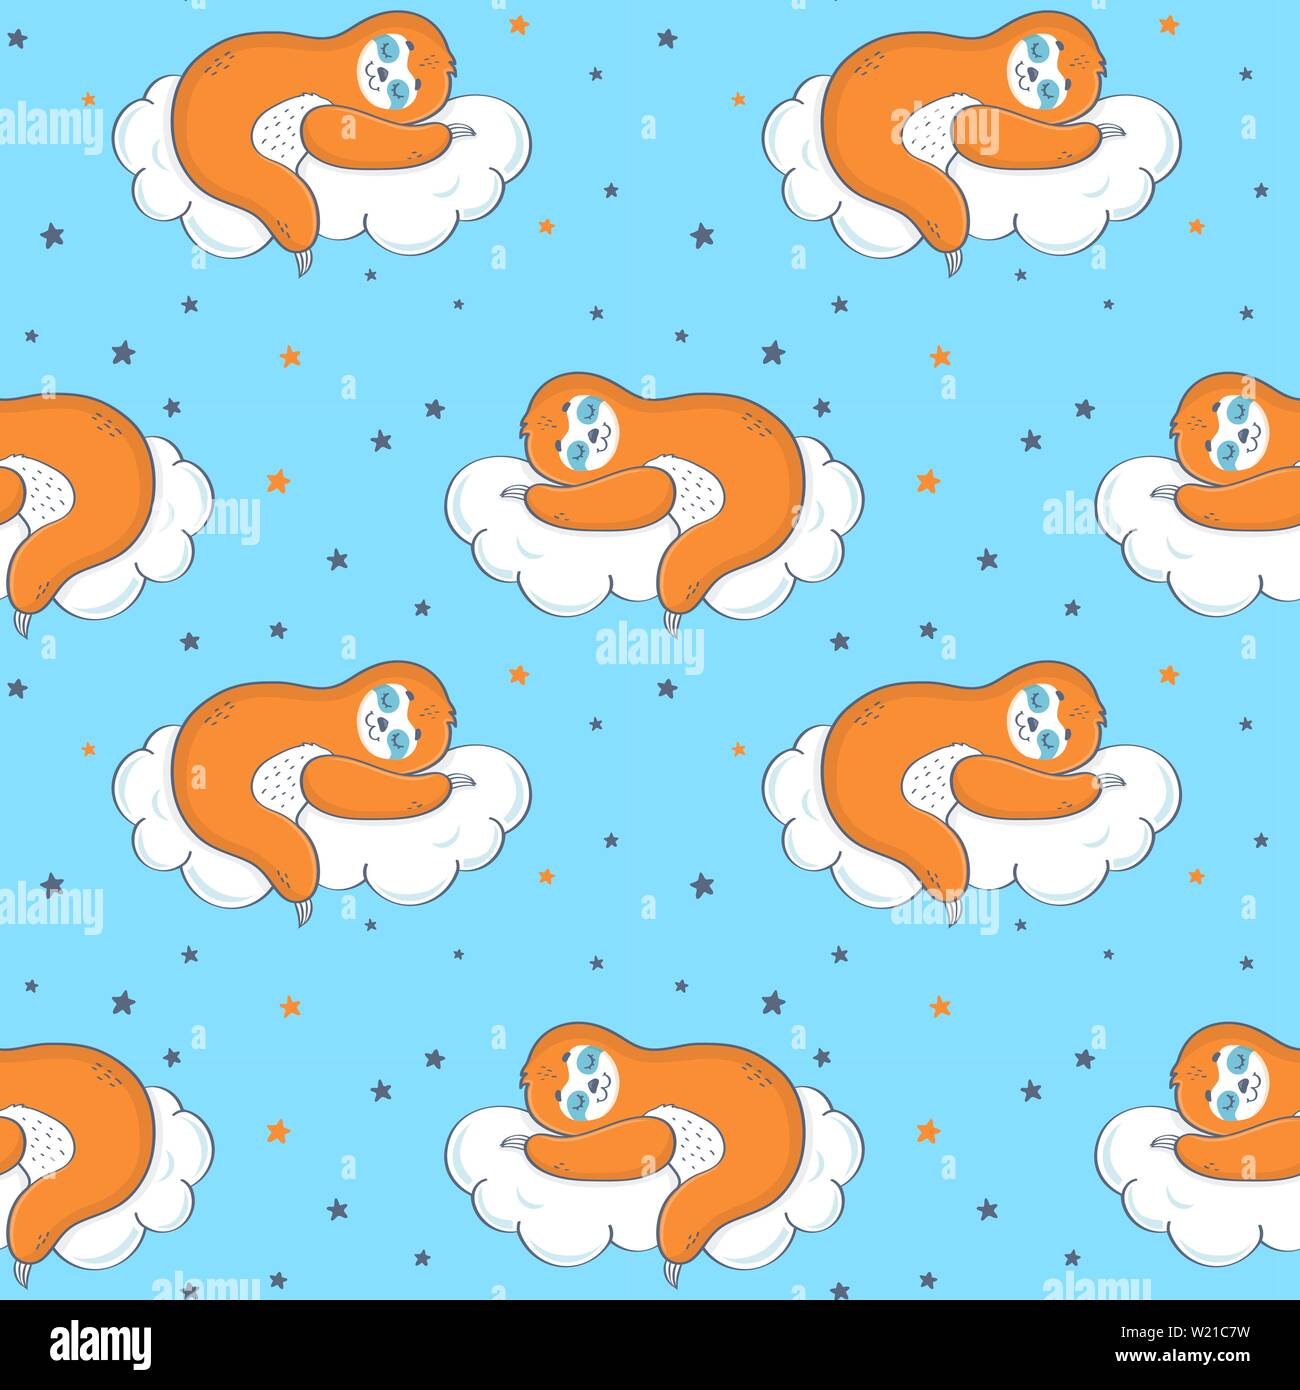 Seamless pattern with sloth sleeping on a cloud. Cute vector background. Stock Vector